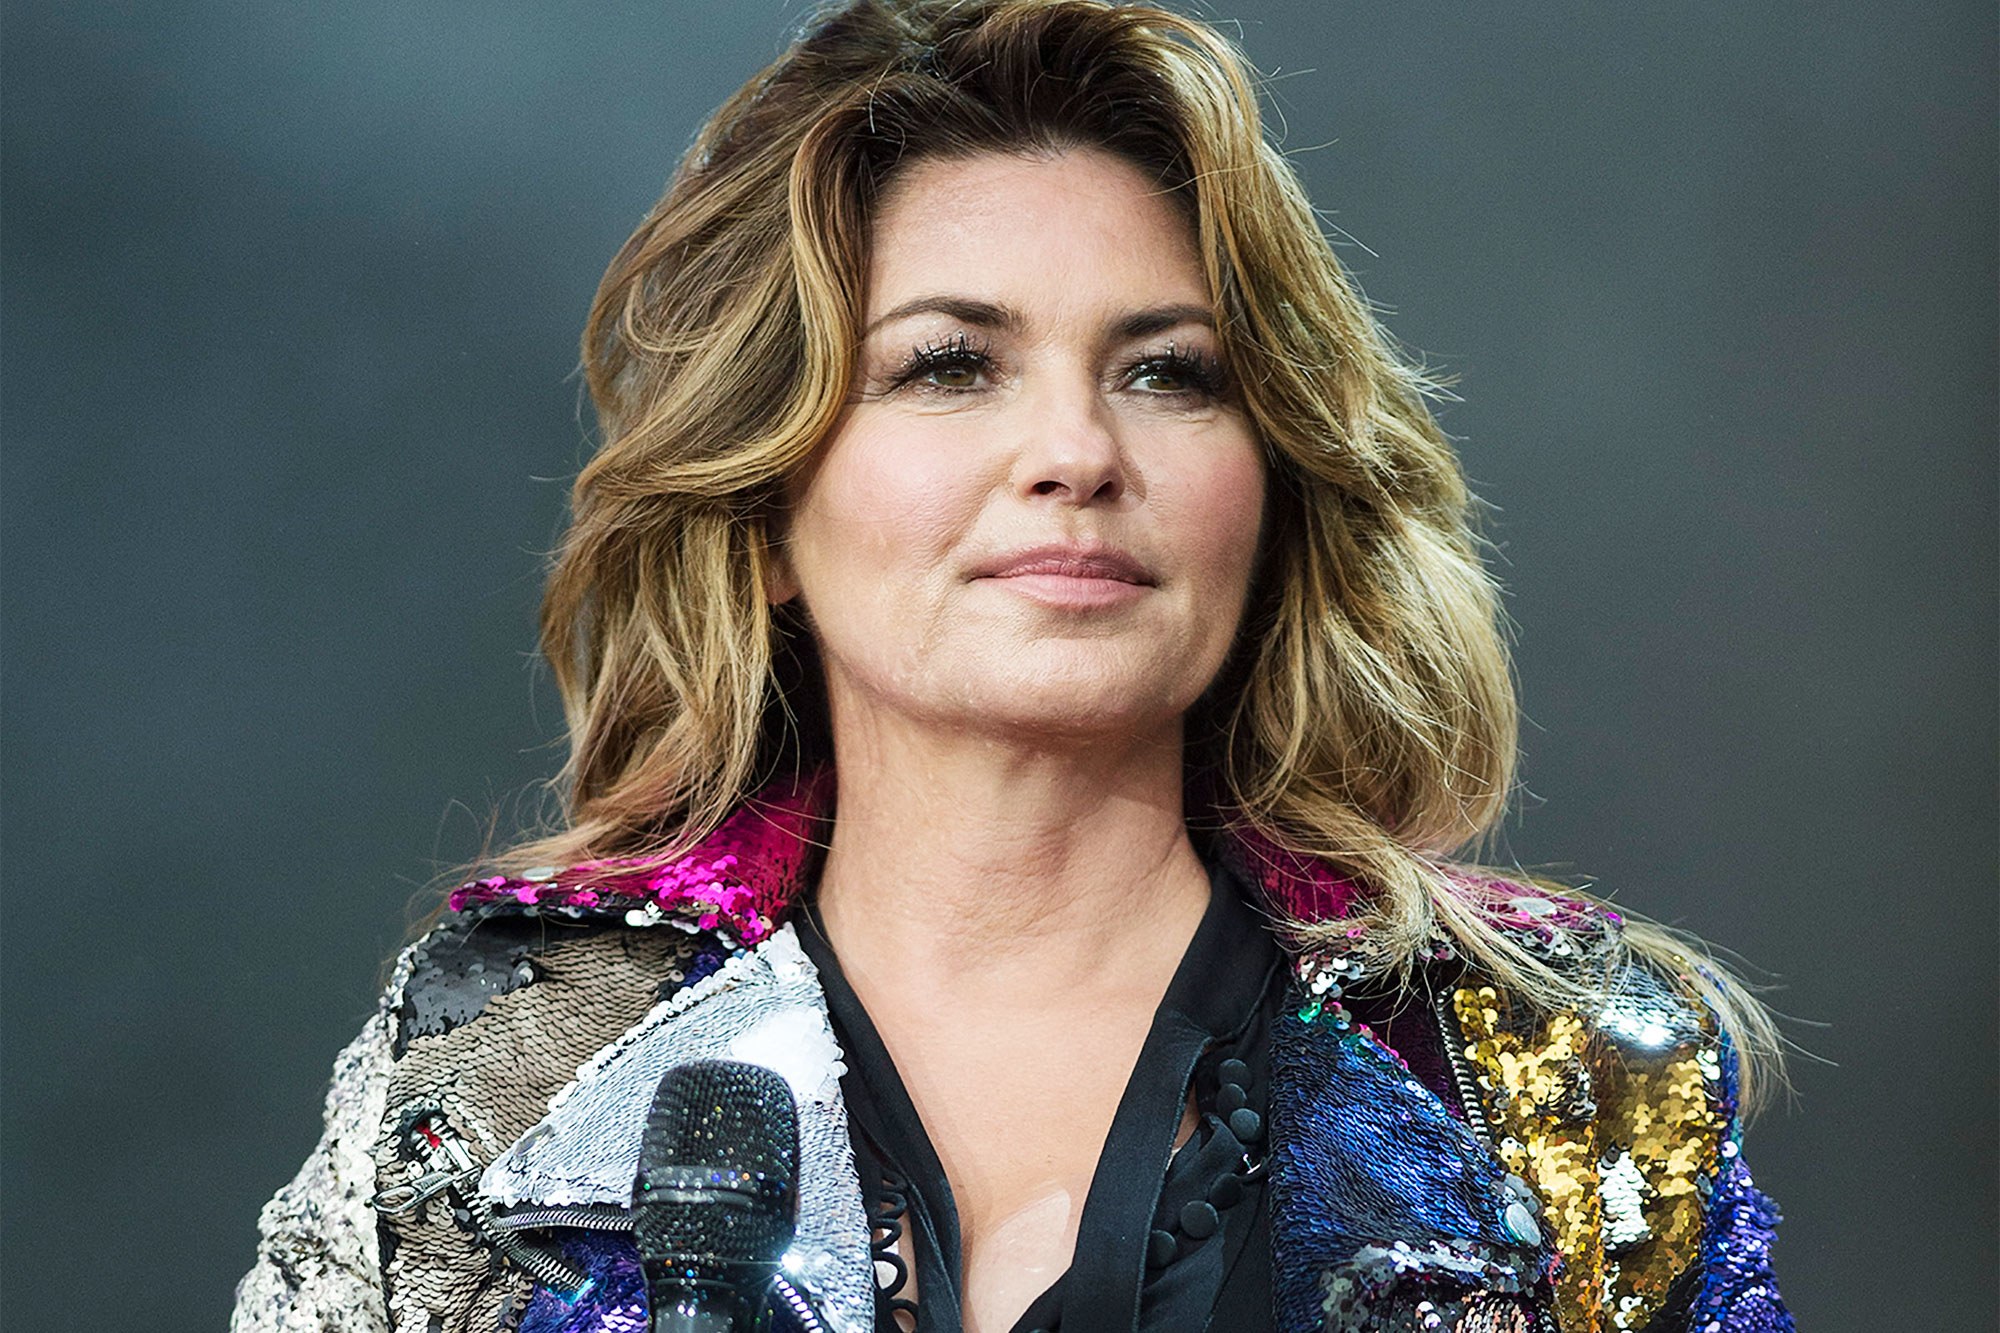 25 Years Ago: Shania Twain Releases ‘The Woman in Me’